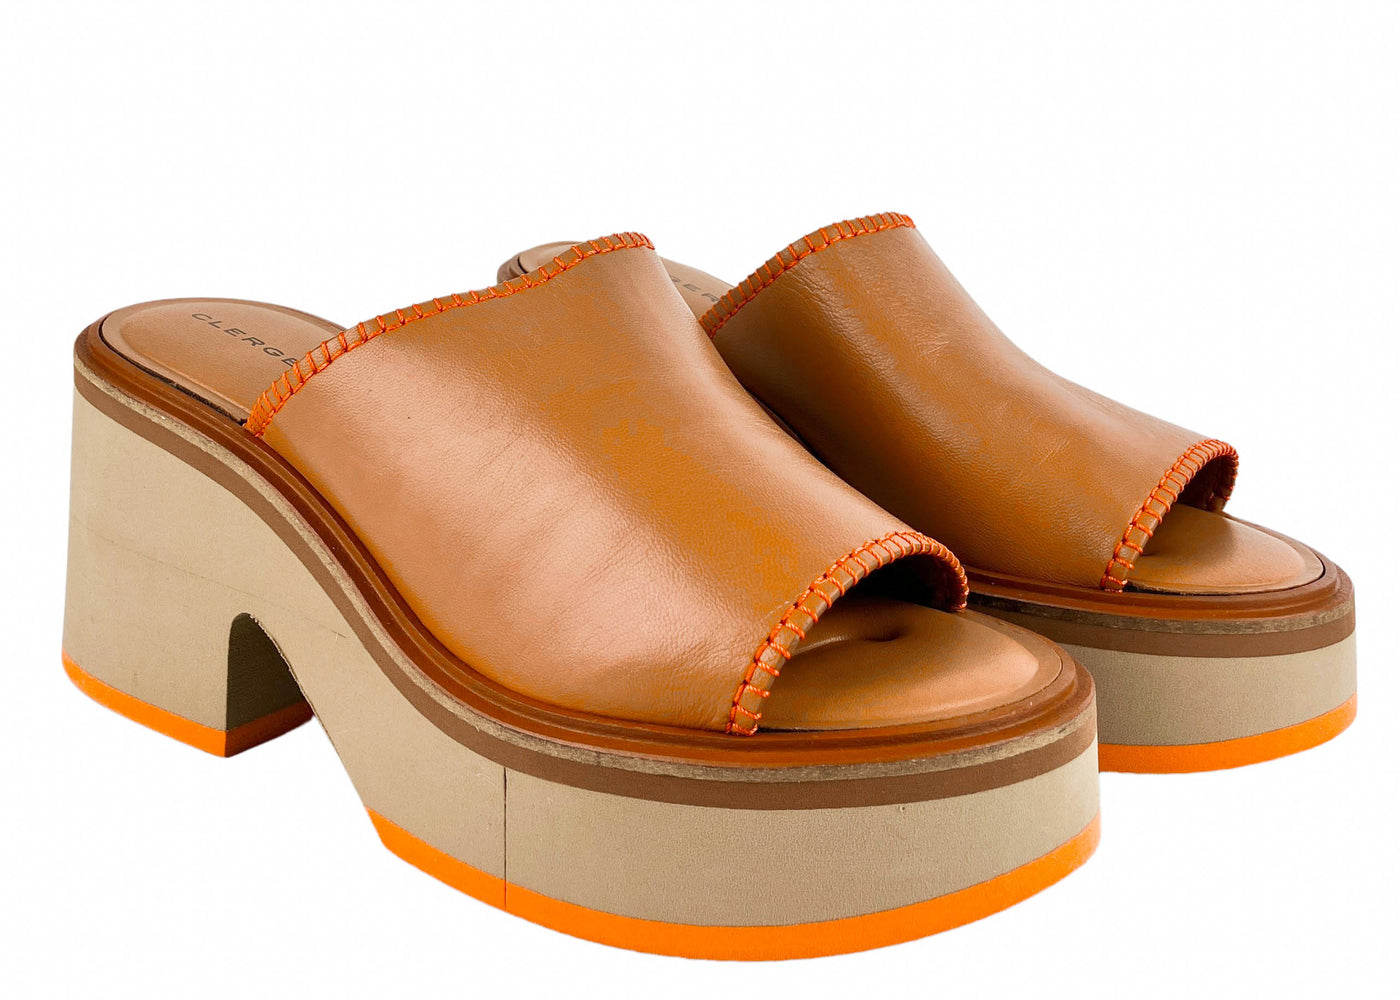 Clergerie Cessy Sandal in Brown - Discounts on Clergerie at UAL